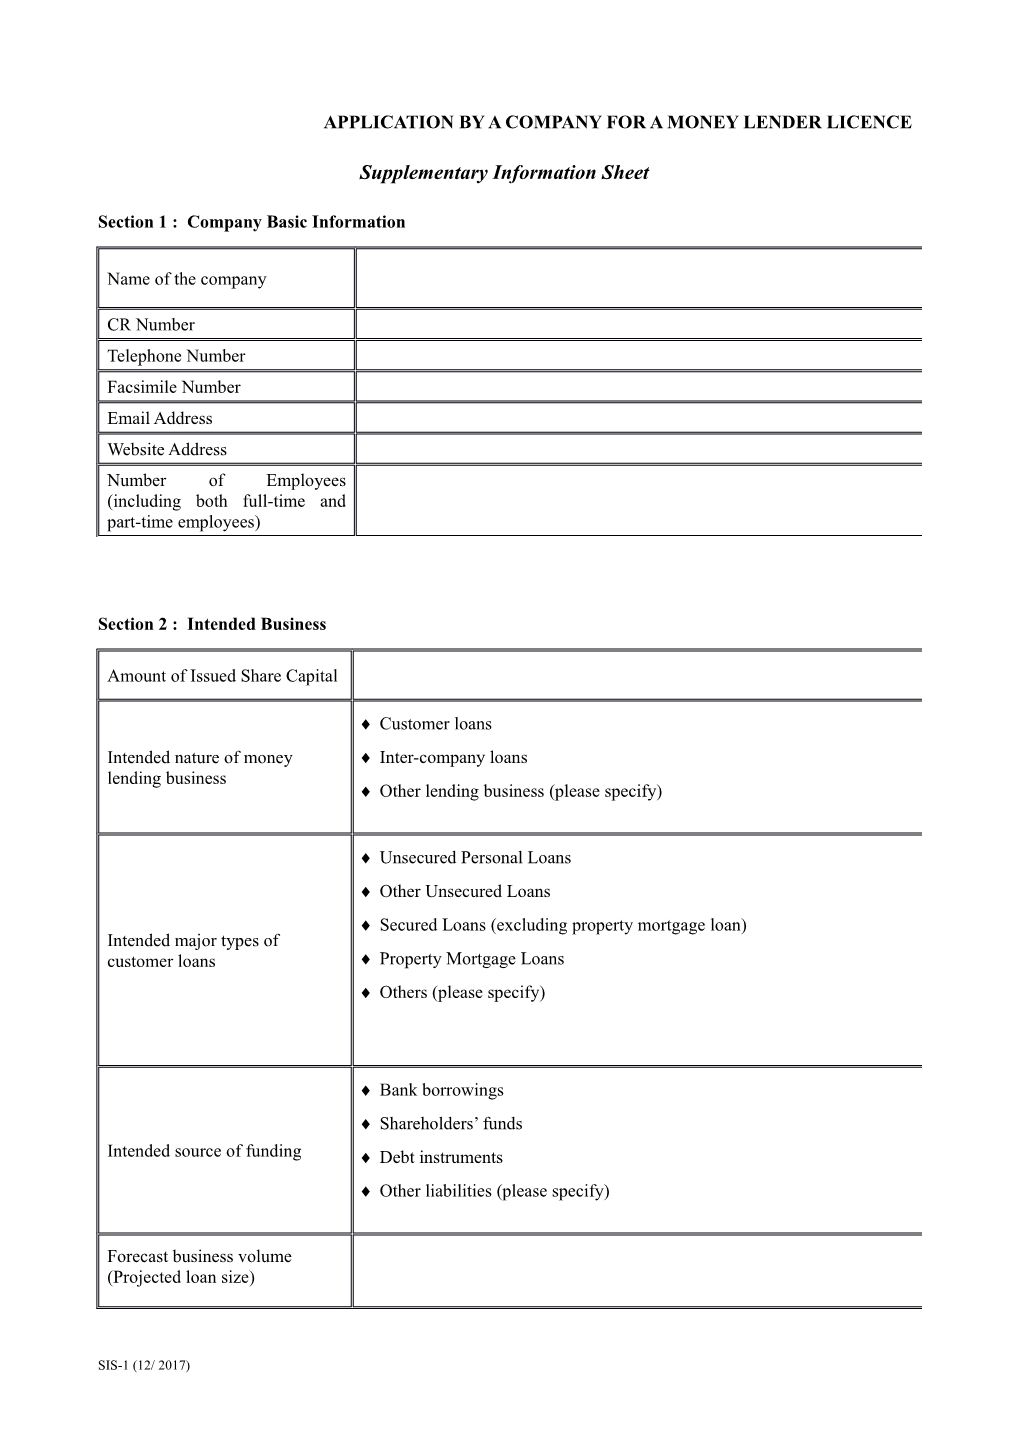 SIS-1 Supplementary Information Sheet - Application by a Company for a Money Lenders Licence